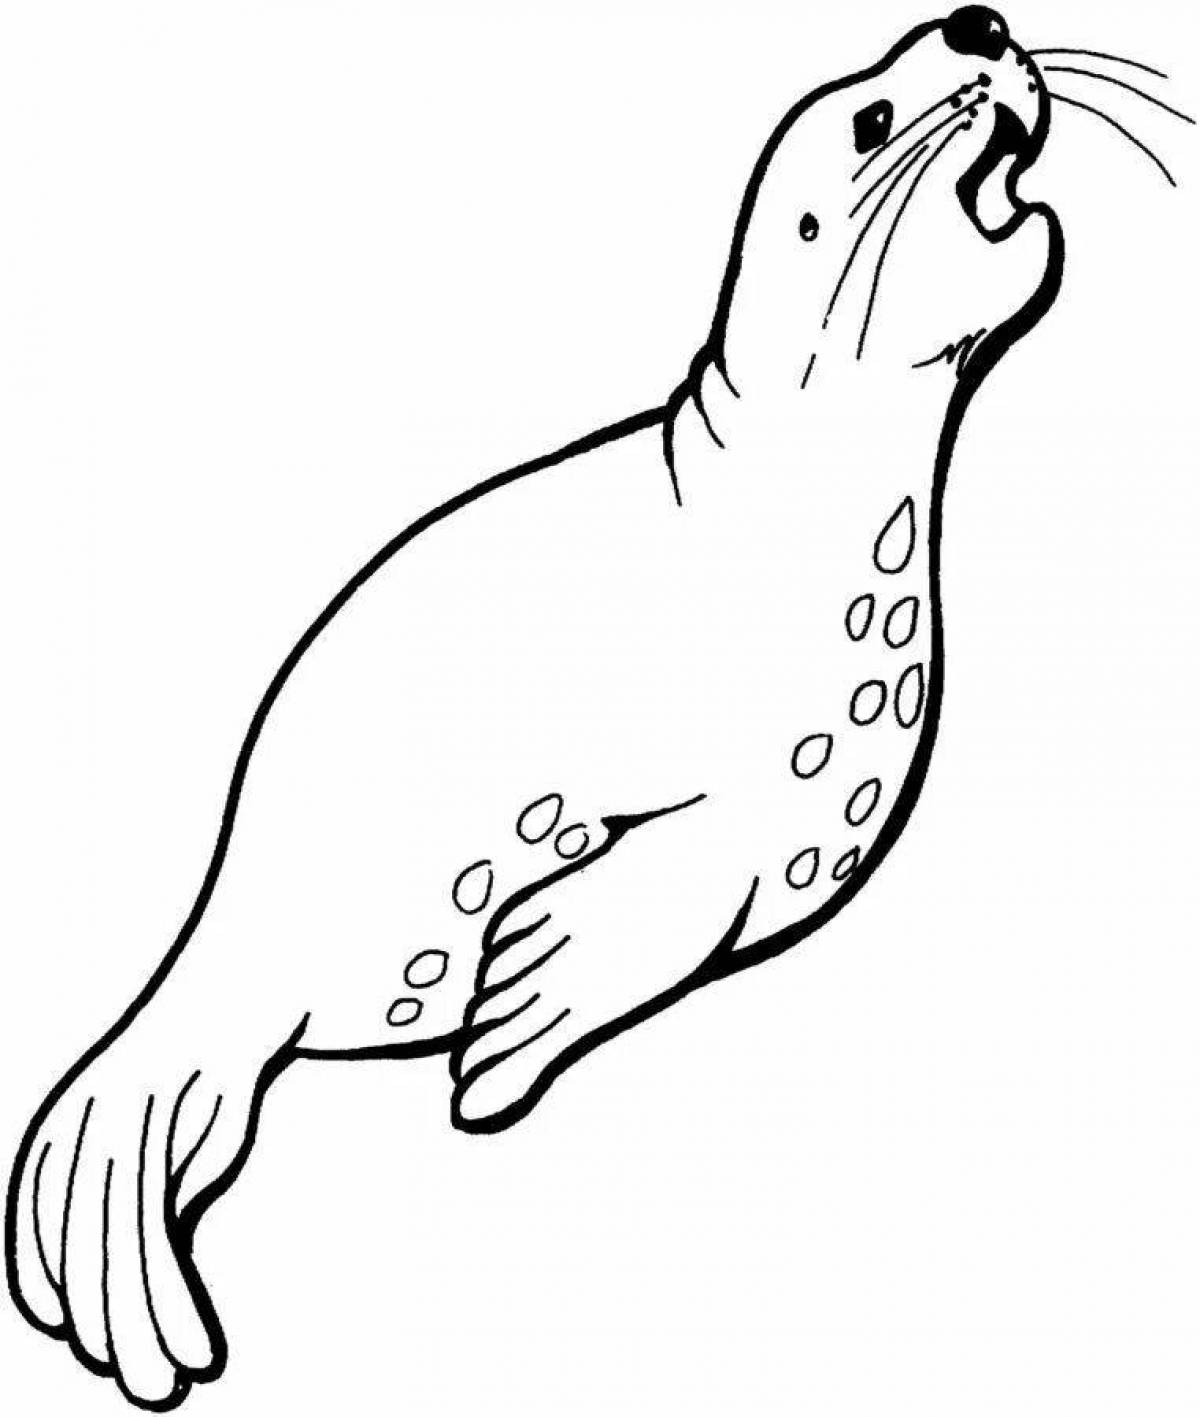 Fancy leopard seal coloring page